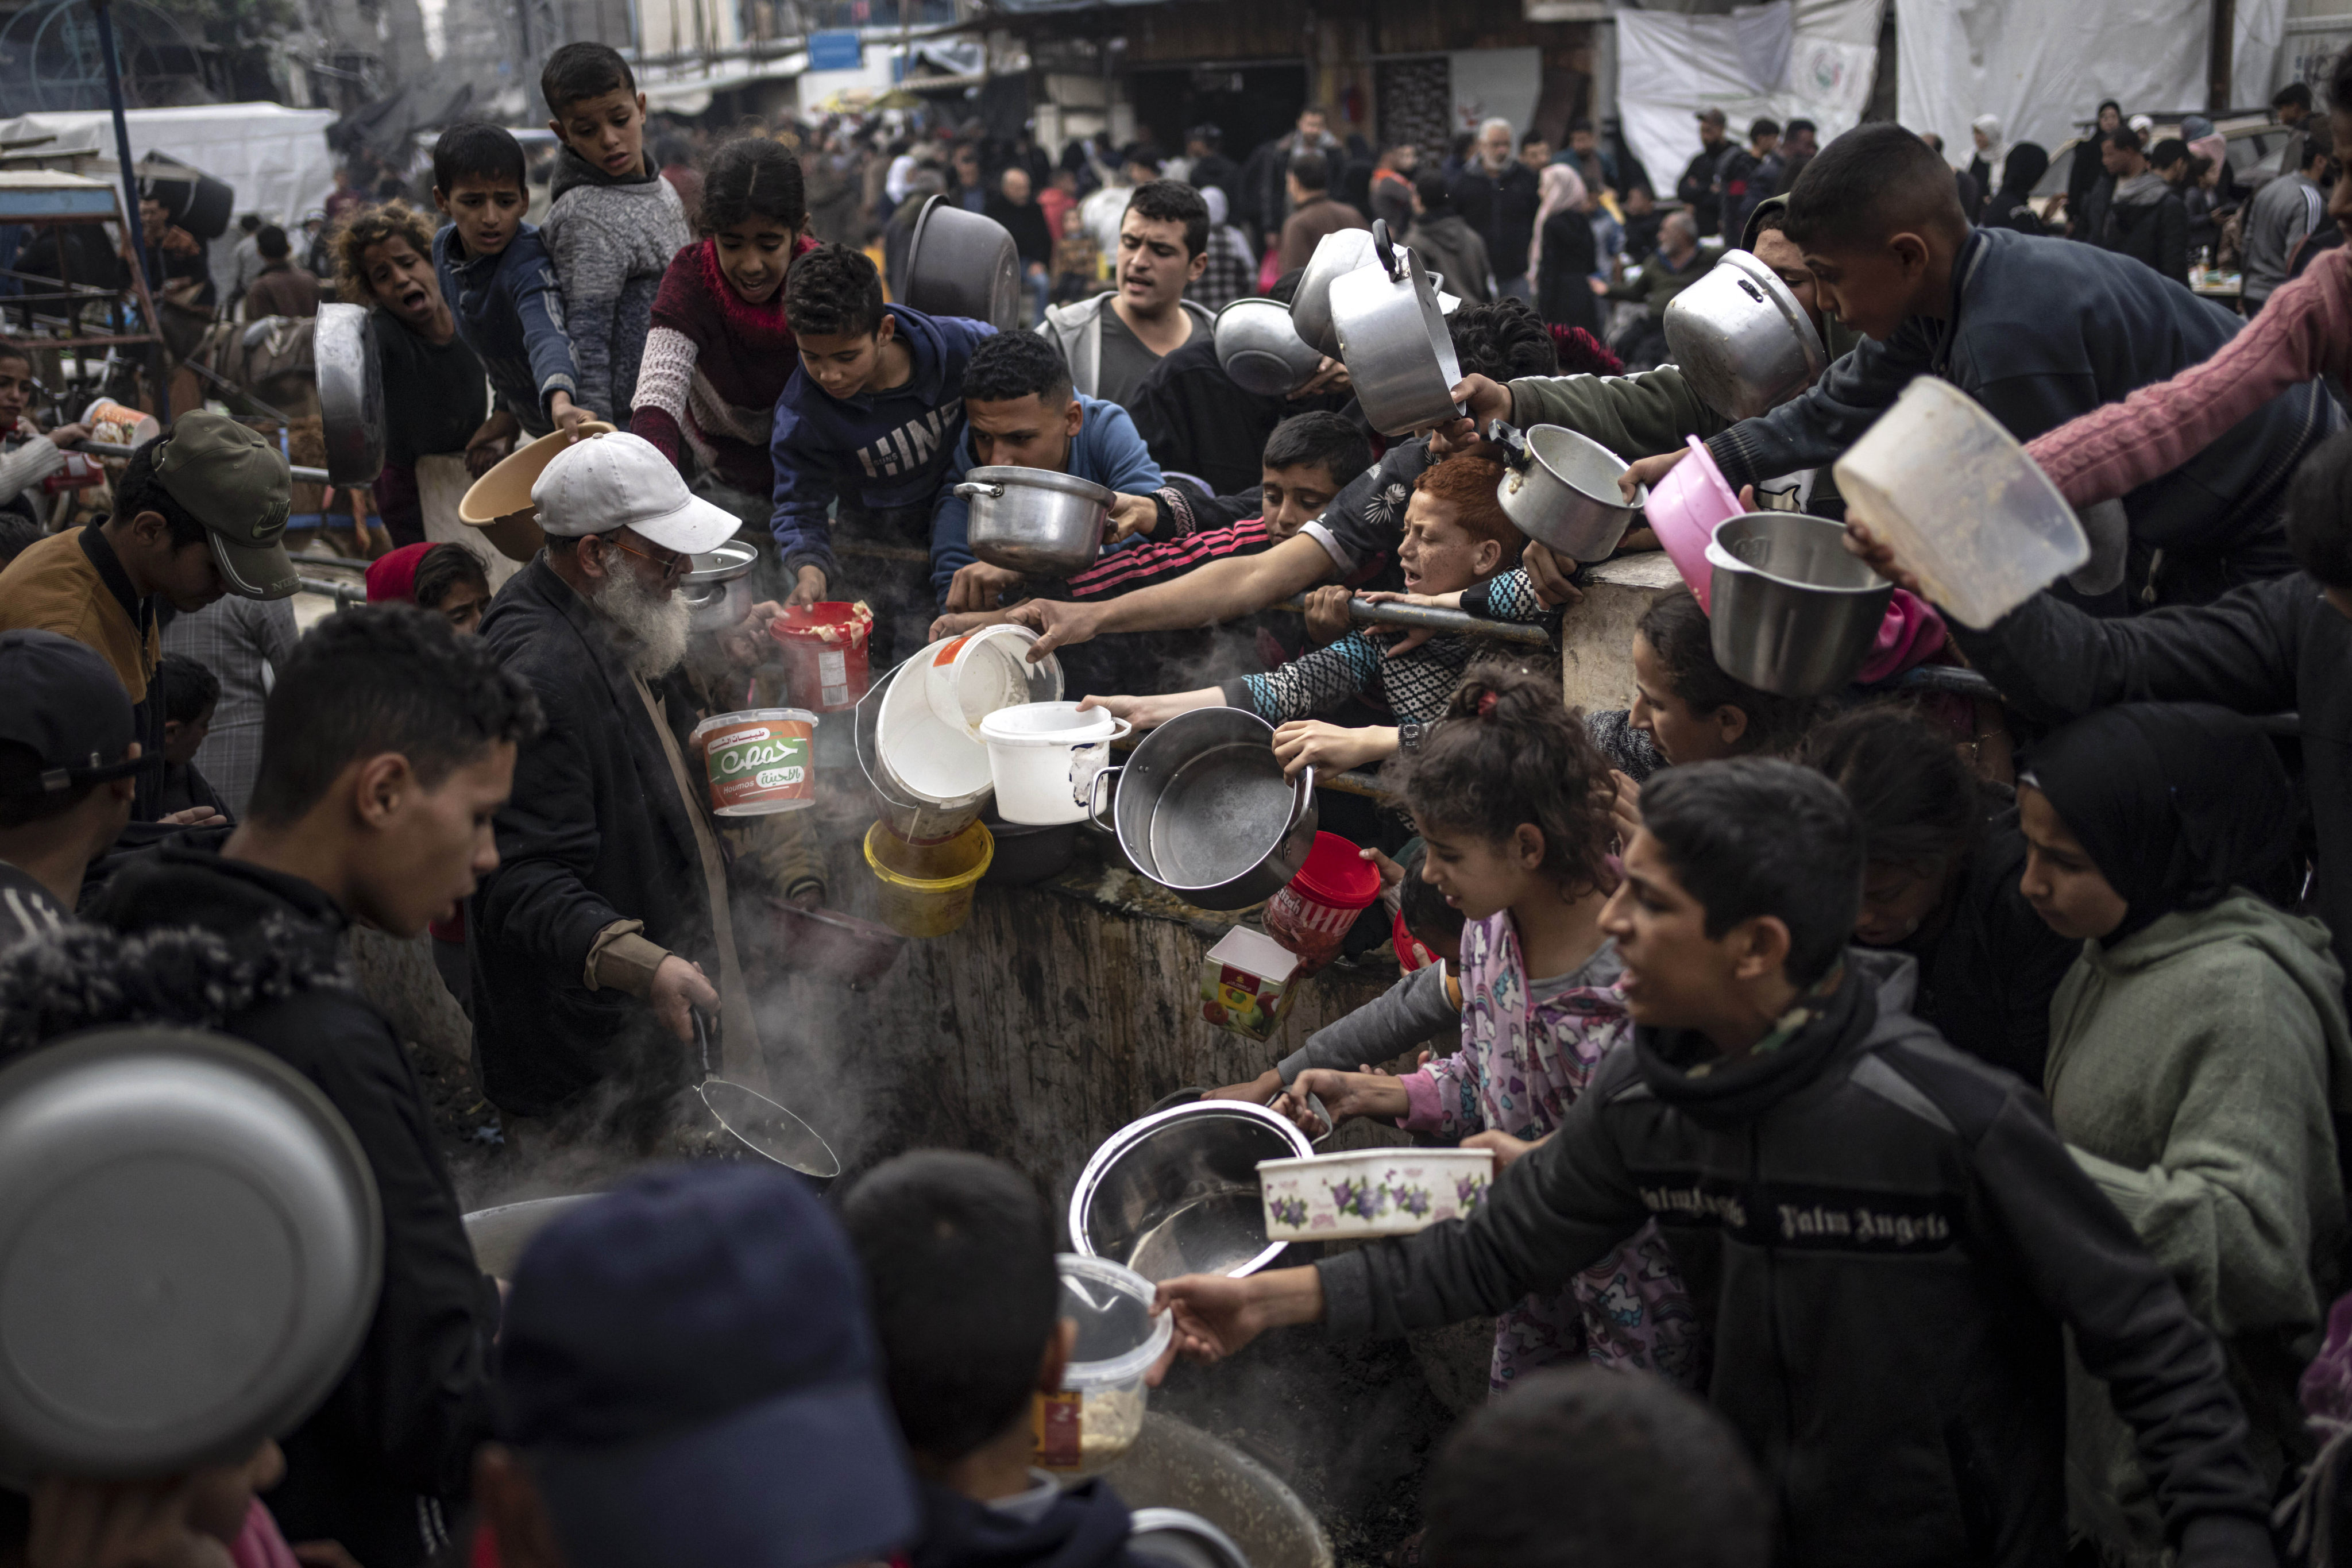 Palestinians converge for a free meal in Rafah, Gaza Strip. International aid agencies say Gaza is suffering from shortages of food, medicine and other basic supplies. Photo: AP